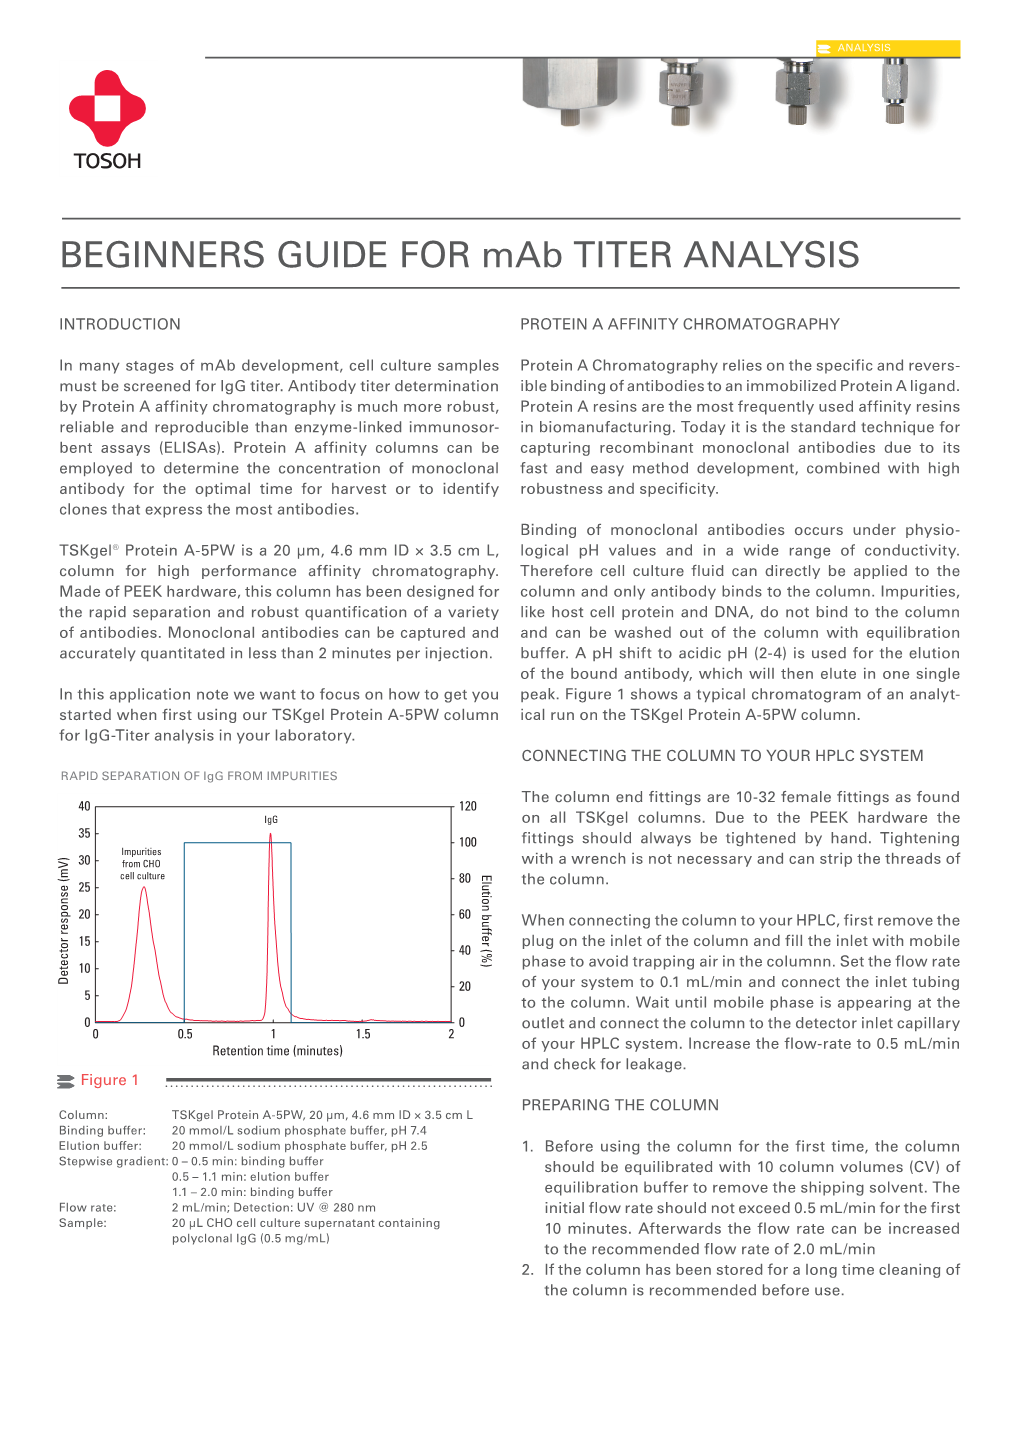 BEGINNERS GUIDE for Mab TITER ANALYSIS